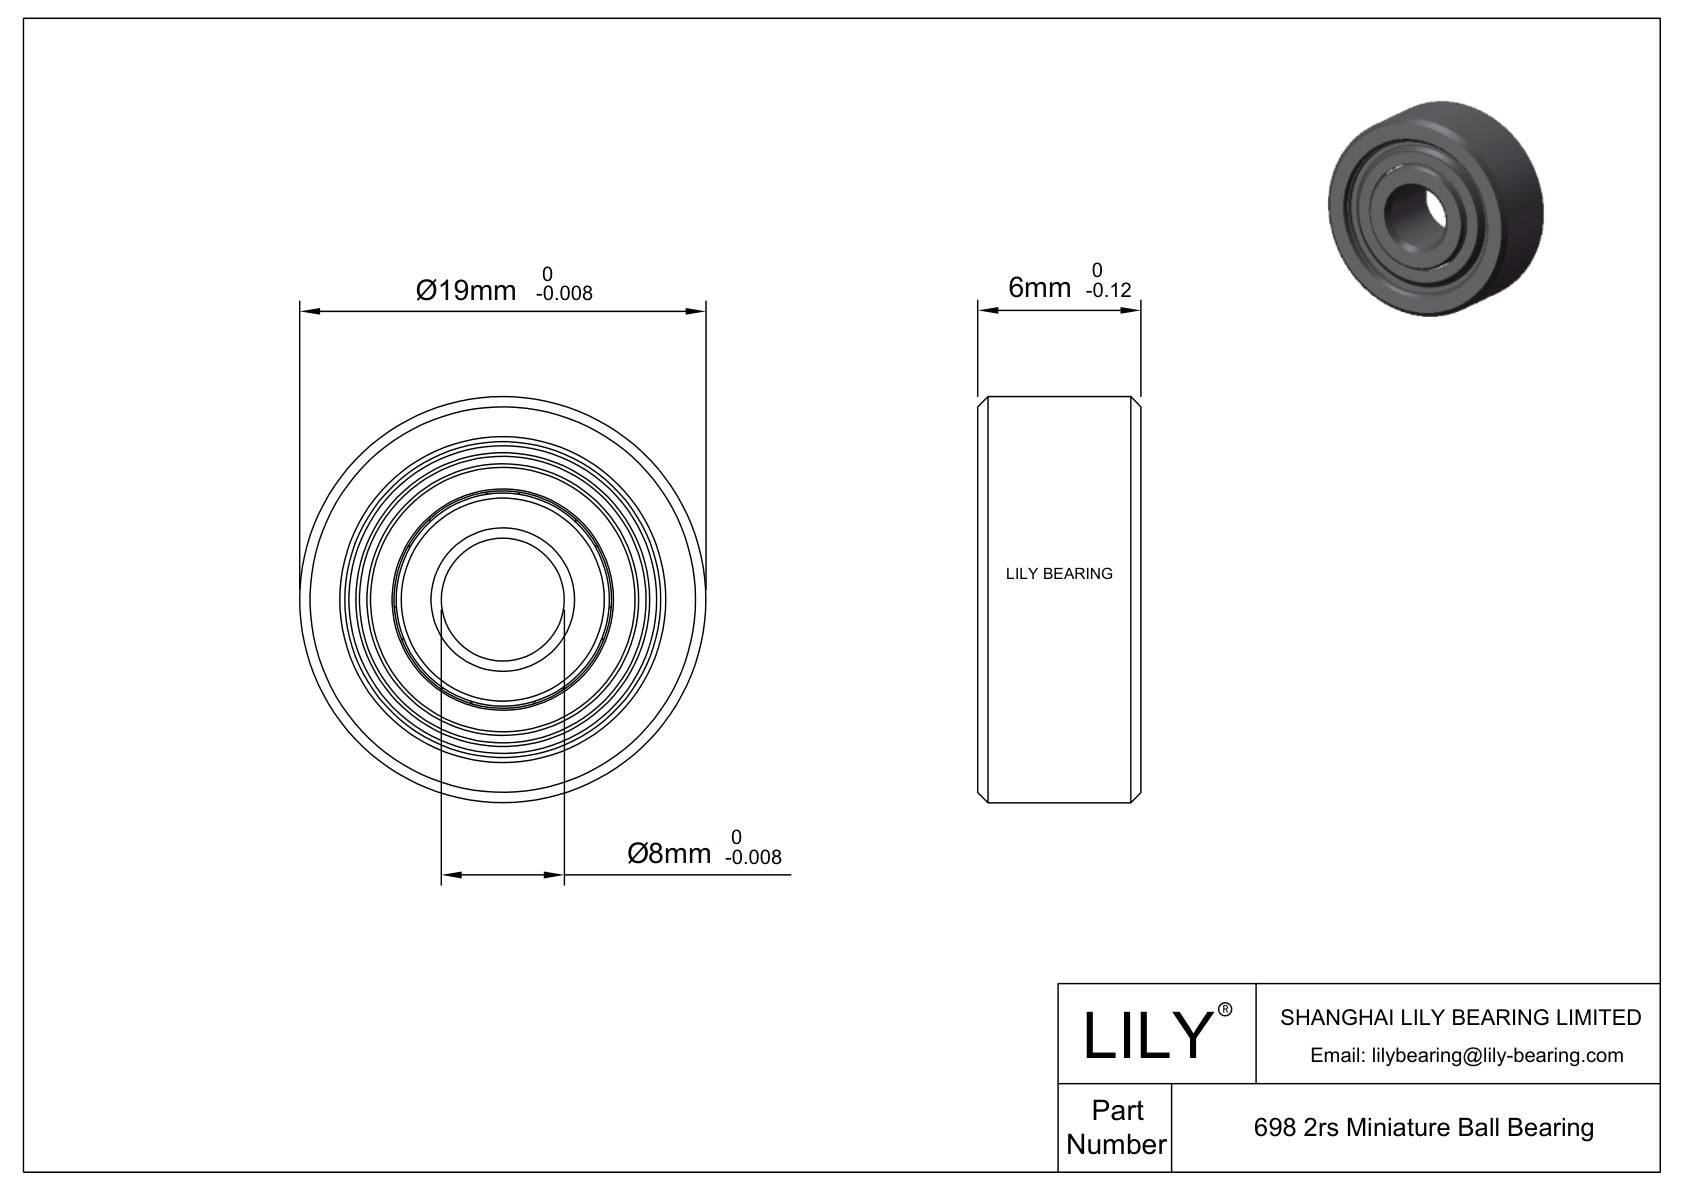 LILY-PUT69835-30 Outsourcing Polyurethane bearings cad drawing